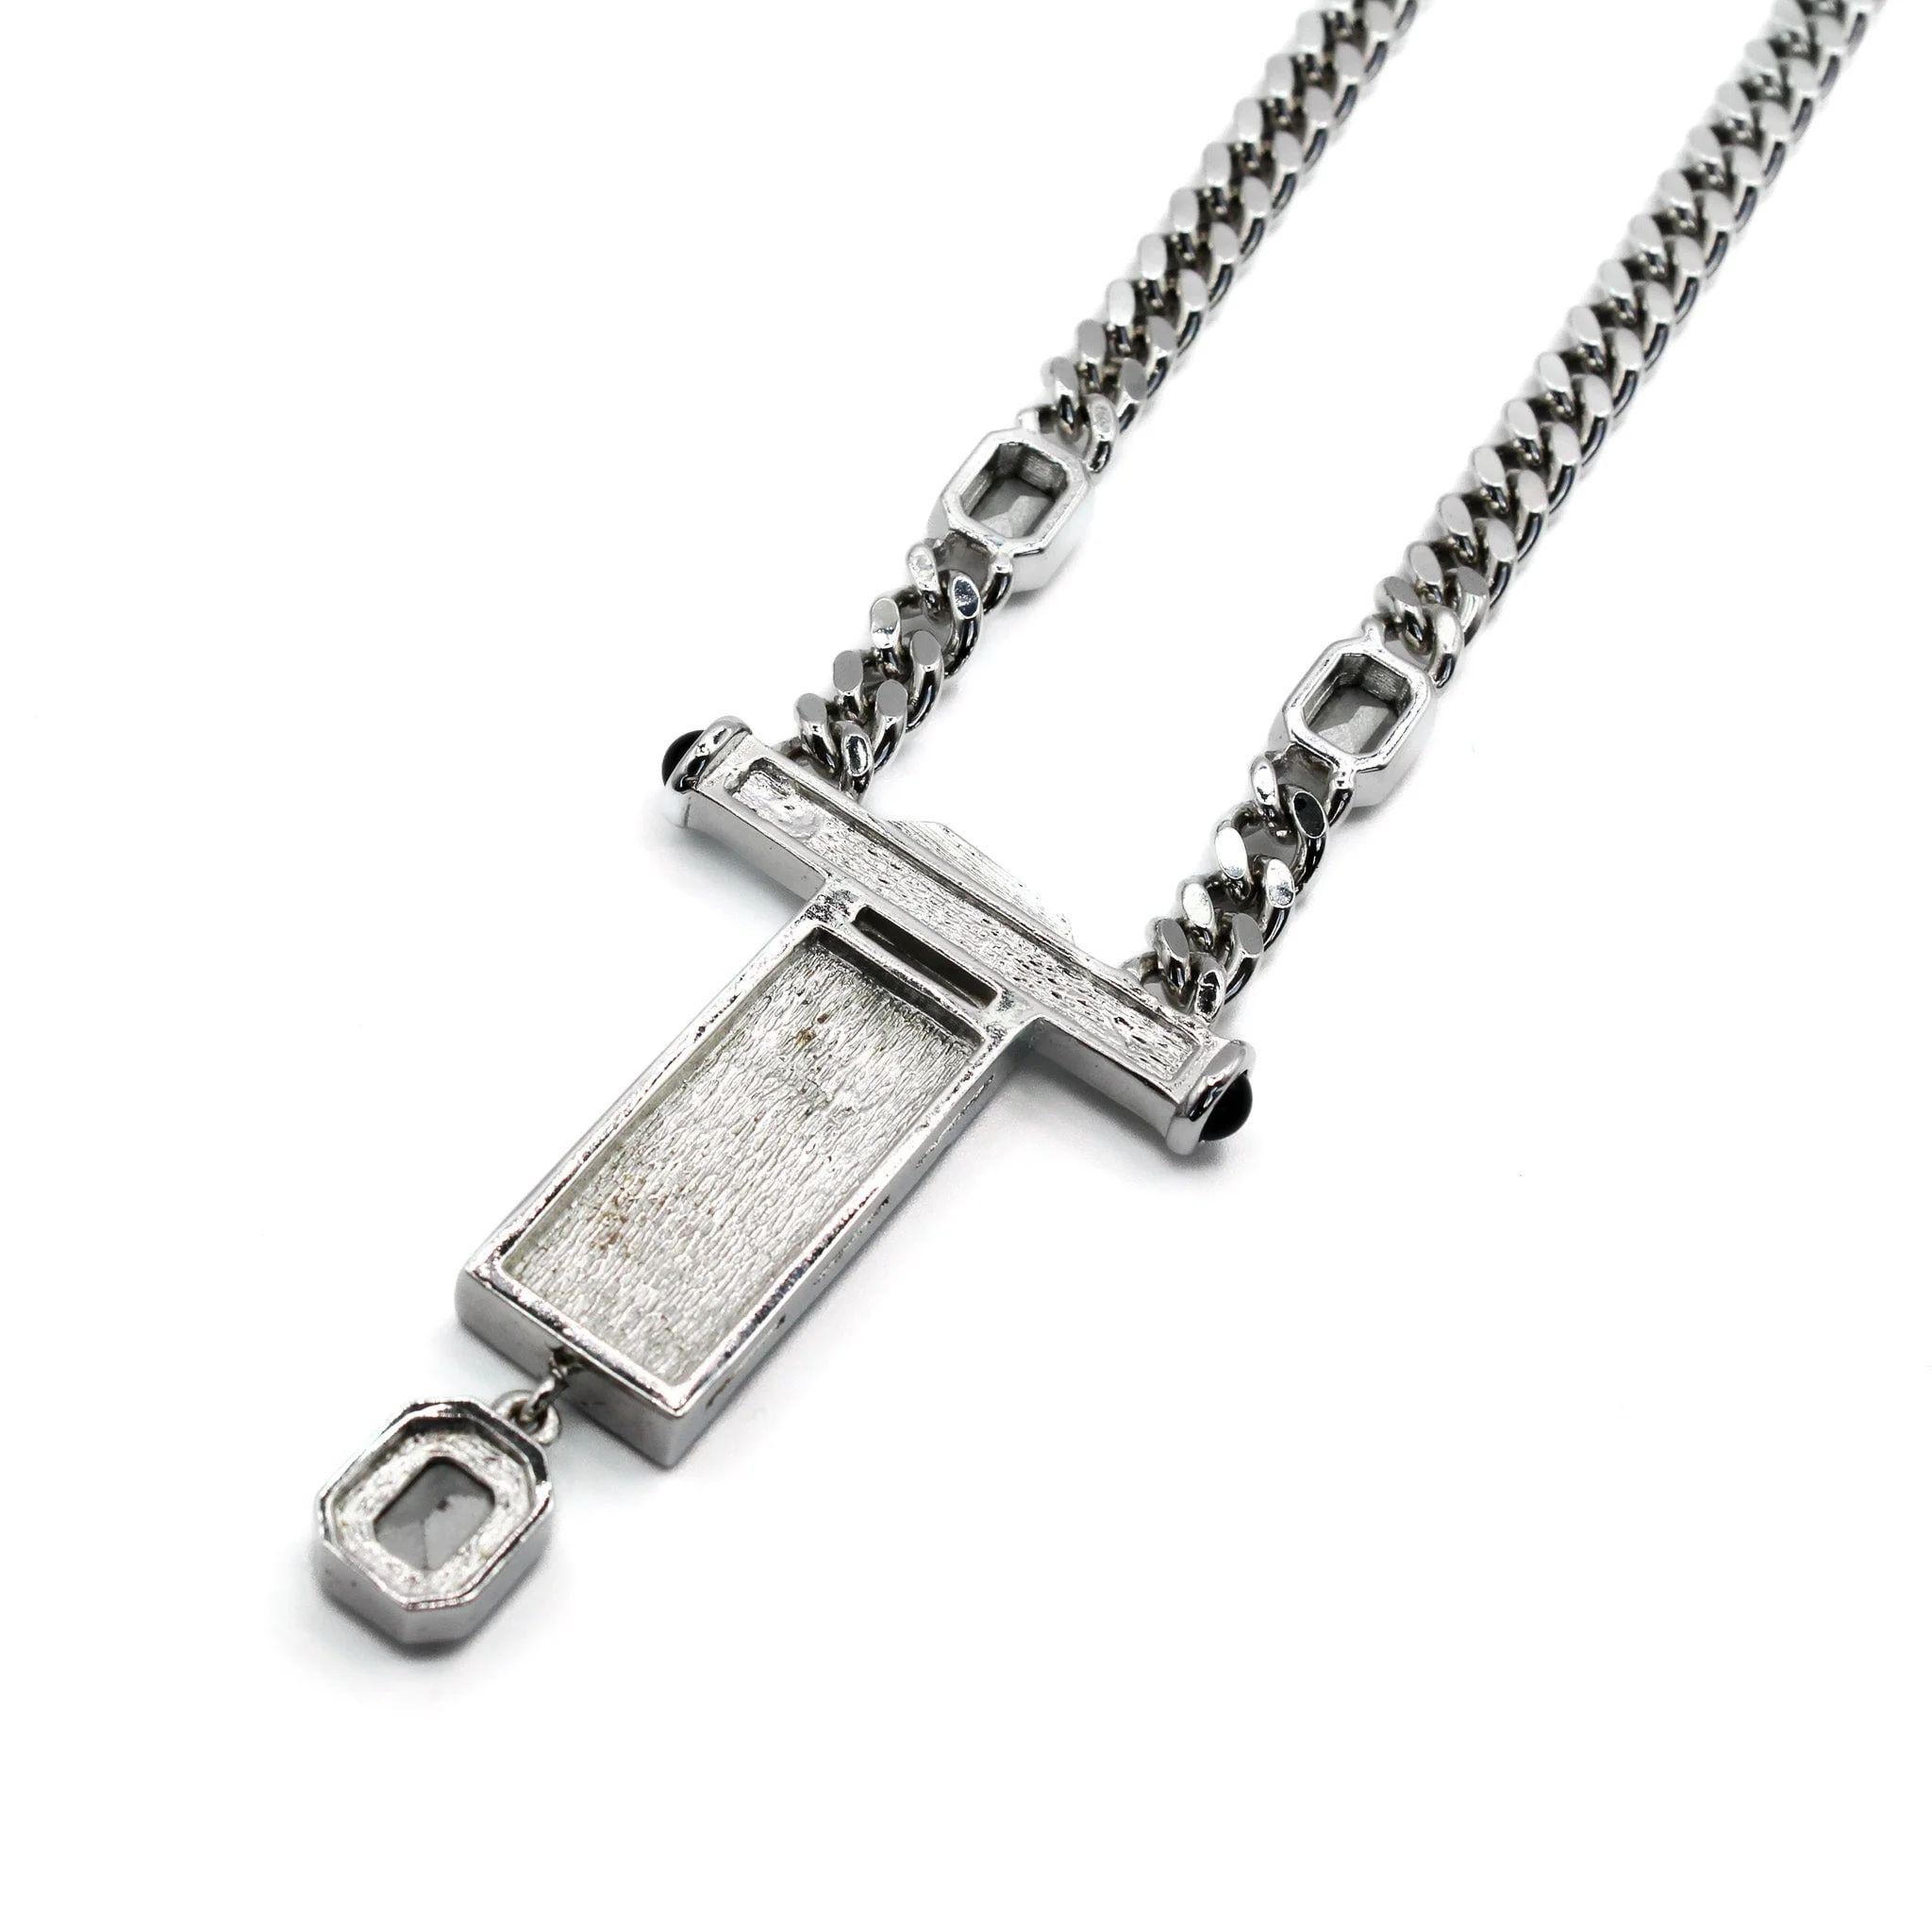 Vintage Christian Dior Silver Plated Necklace 1980s

A Vintage Christian Dior Silver Plated Necklace from the 1980s - a rare and unworn piece from one of the world's most iconic fashion labels. Crafted in Germany from high-quality silver plated